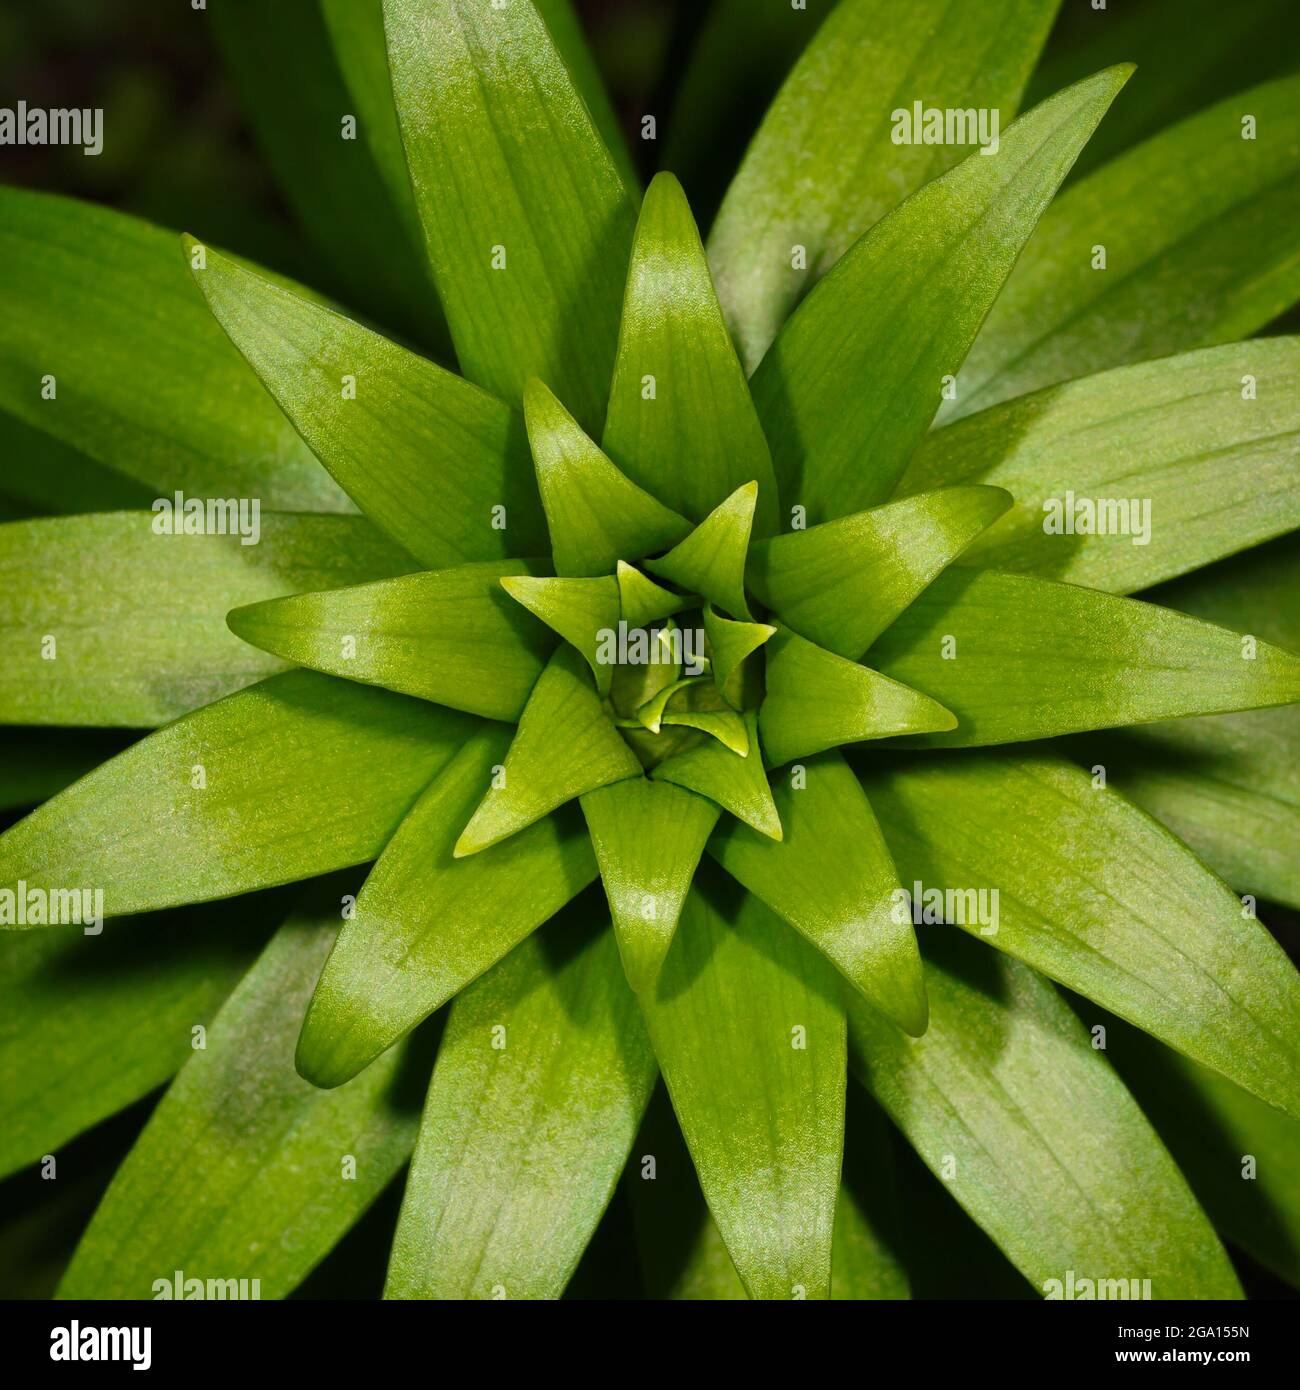 Abstract floral pattern of multi-tiered leaves in the shape of a star Stock Photo